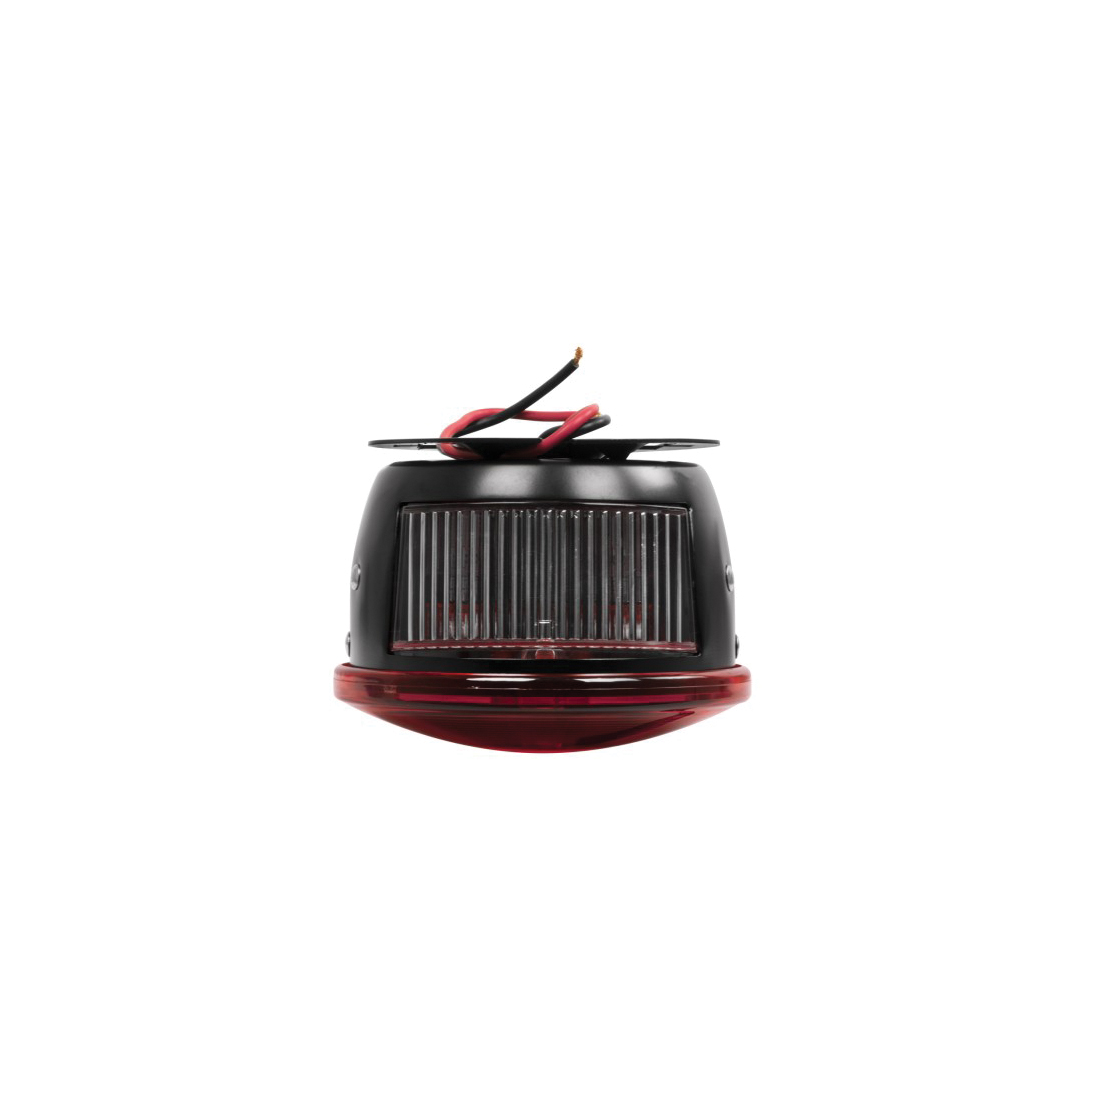 Blazer B55UW Tail Light with Metal Mounting Plate, Incandescent Lamp, Red Housing, Acrylic Lens - 2